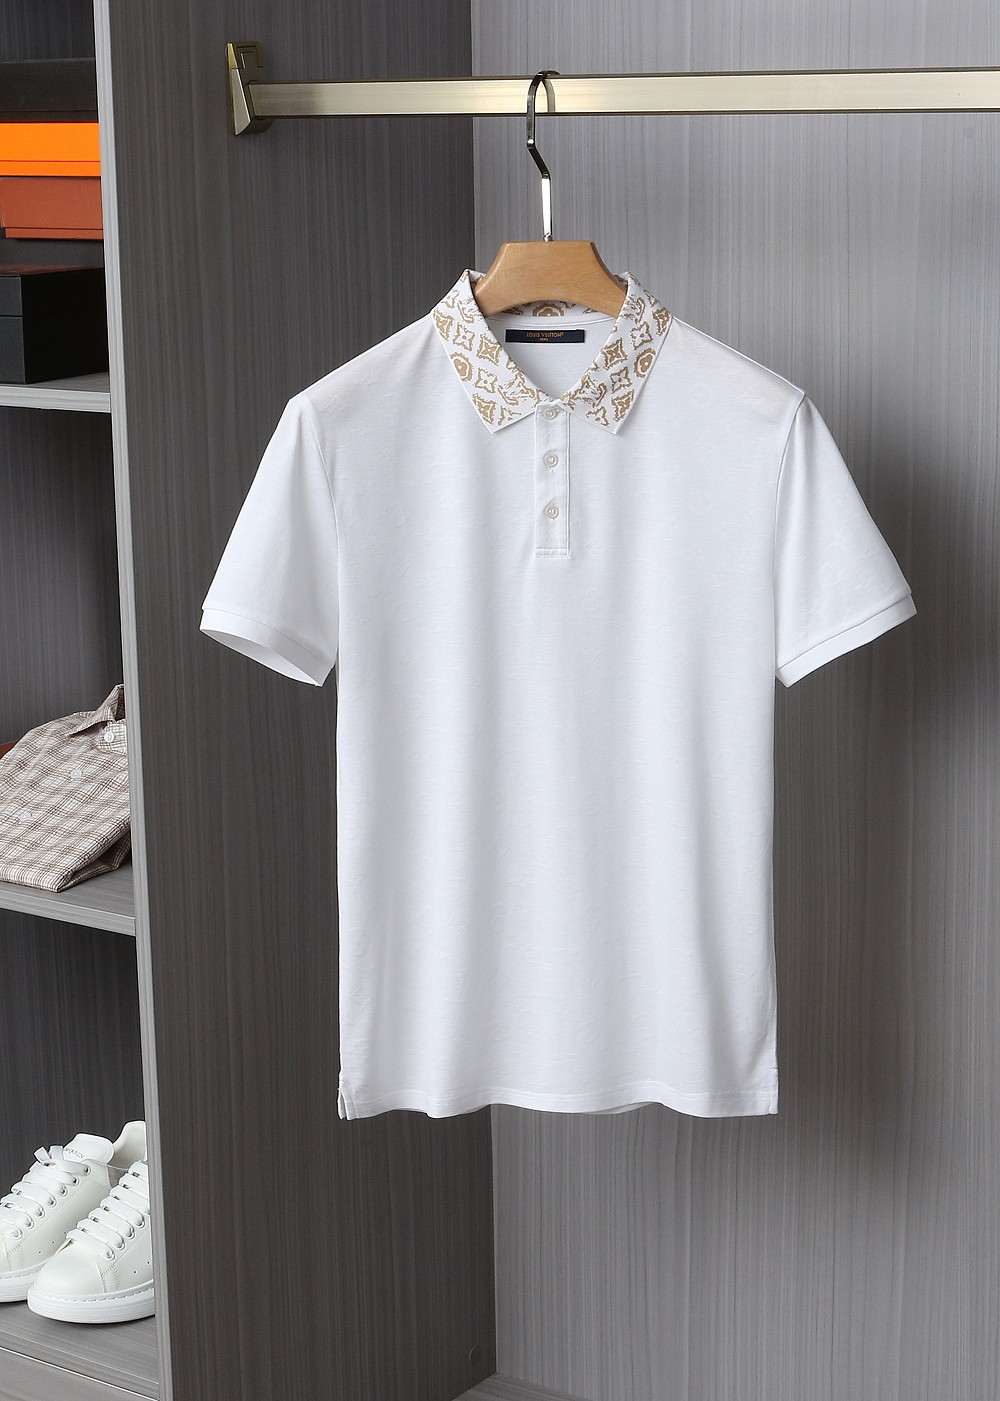 Louis Vuitton Replica
 Clothing Polo Buy Sell
 Black White Embroidery Men Fall/Winter Collection Fashion